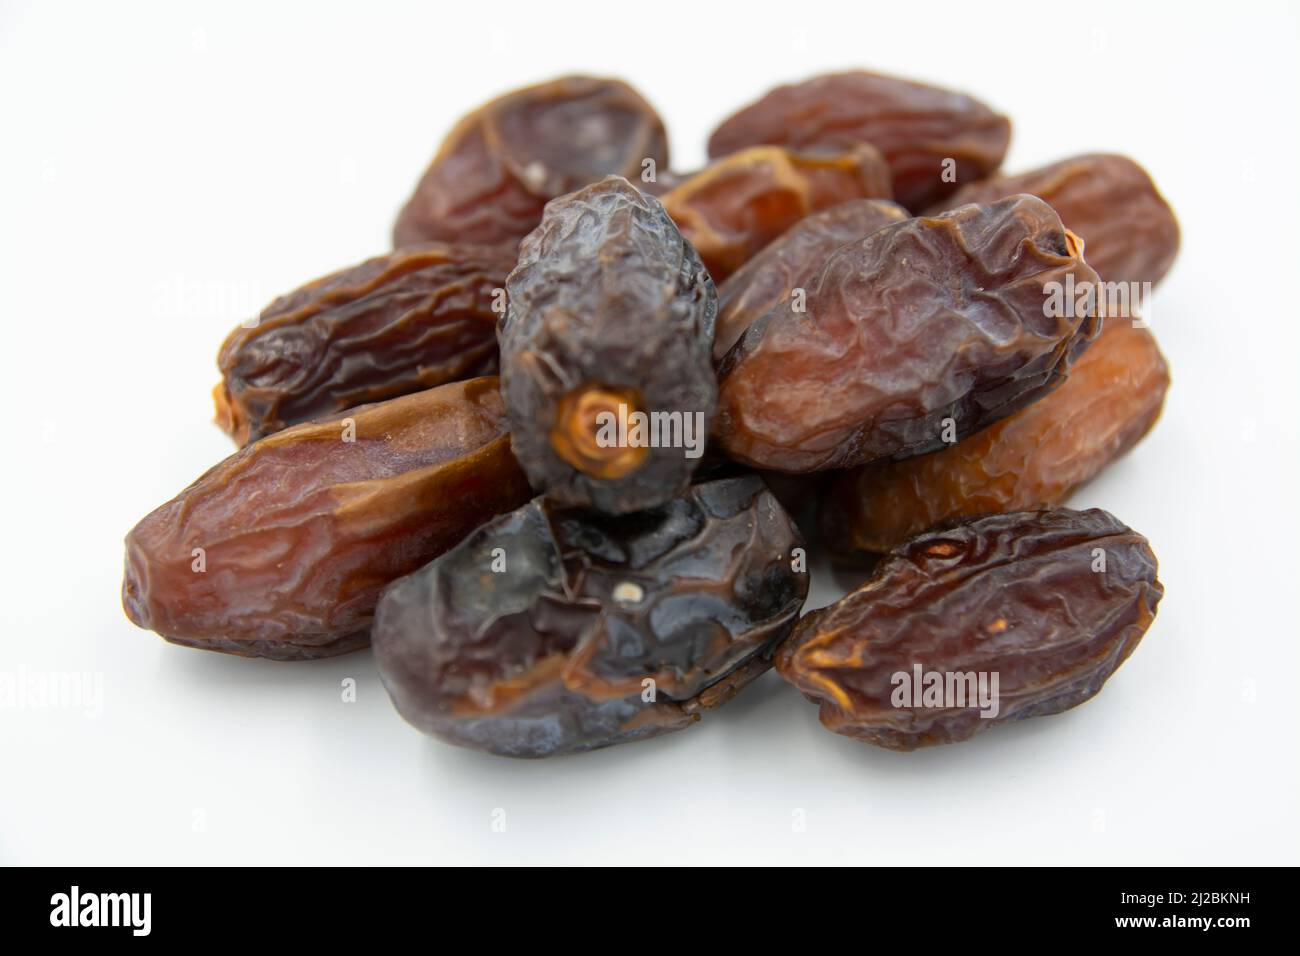 The most special fruit of the month of Ramadan, the date fruit Stock Photo